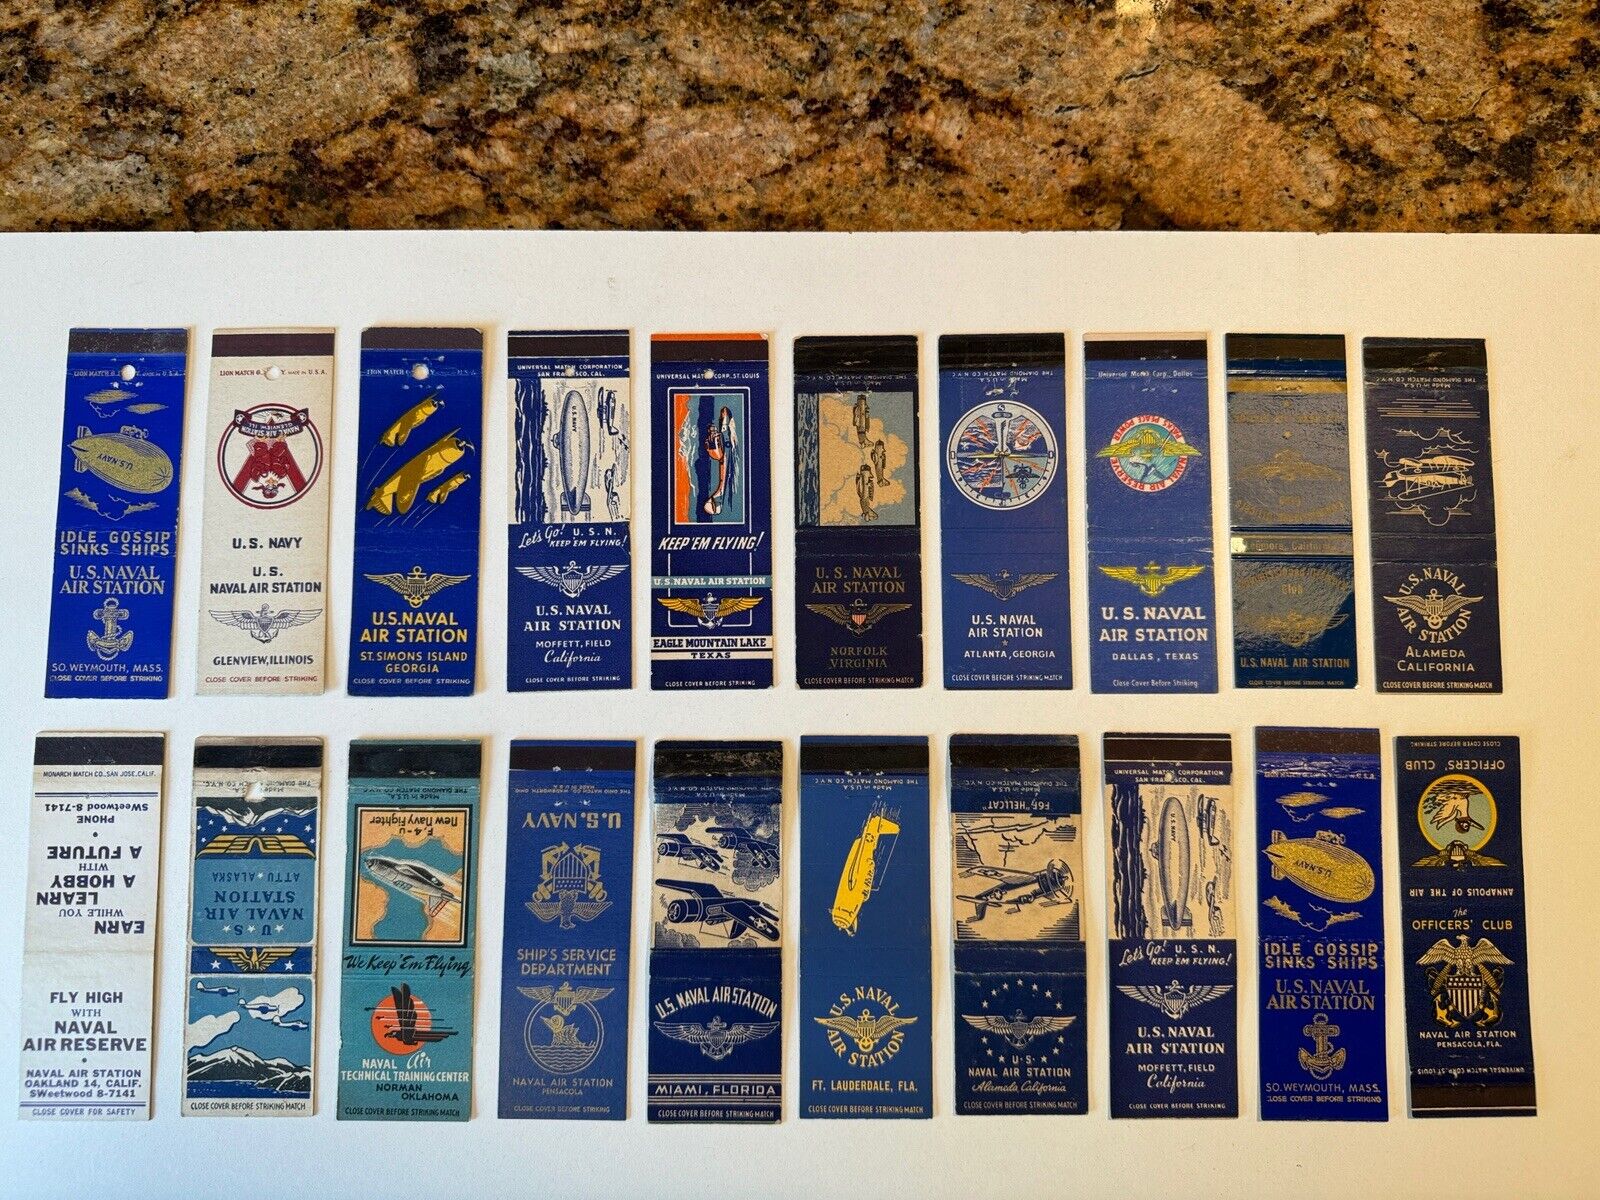 Lot of 20 U.S. NAVAL AIR STATION / Advertising Matchbook Covers / U. S. Military